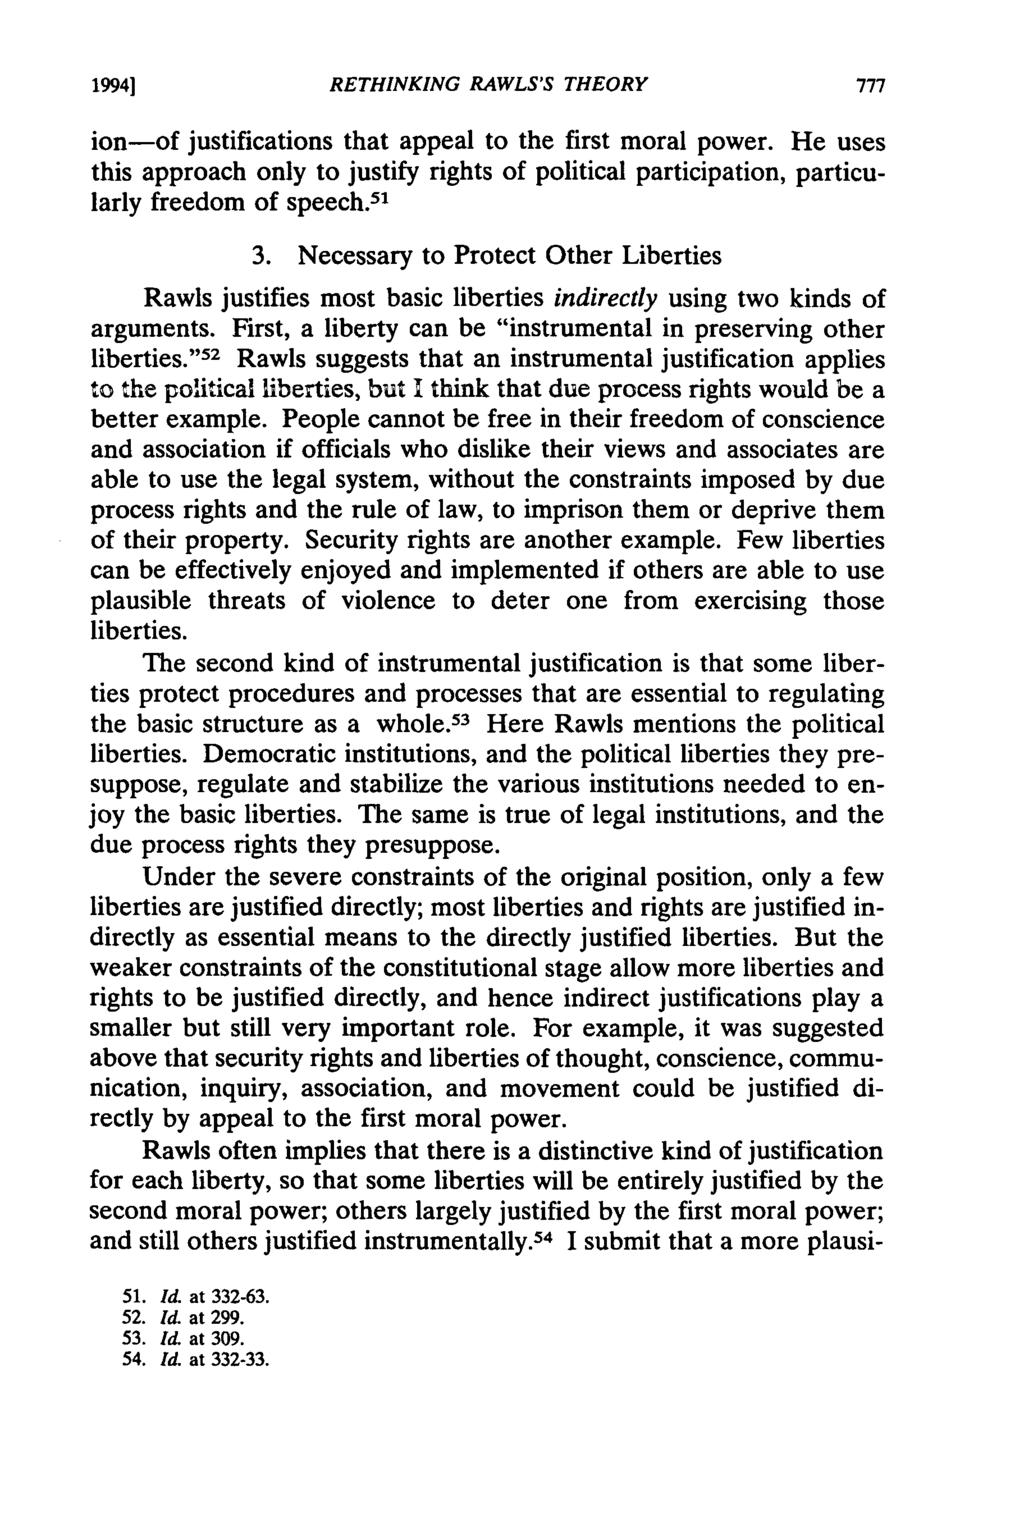 19941 RETHINKING RAWLS'S THEORY ion-of justifications that appeal to the first moral power. He uses this approach only to justify rights of political participation, particularly freedom of speech.